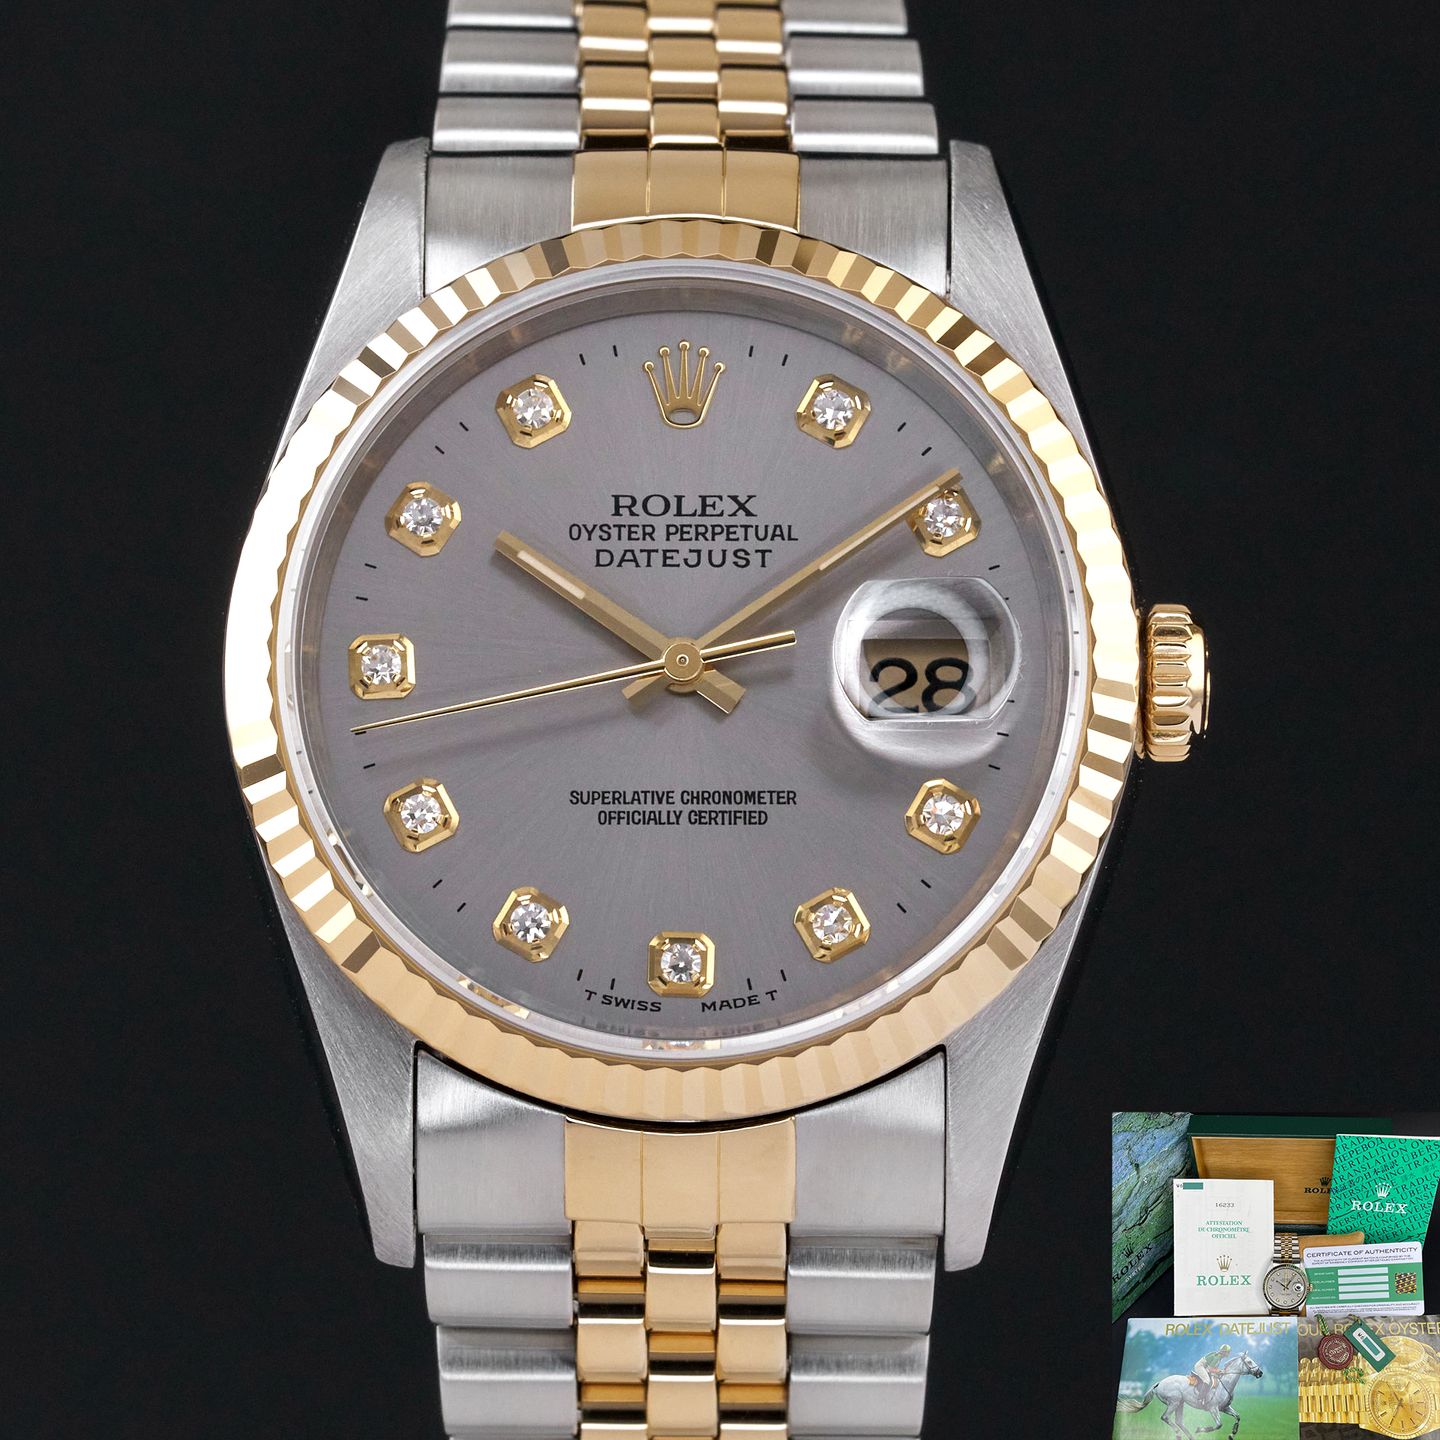 Rolex Datejust 36 16233 (1995) - 36mm Goud/Staal (1/8)